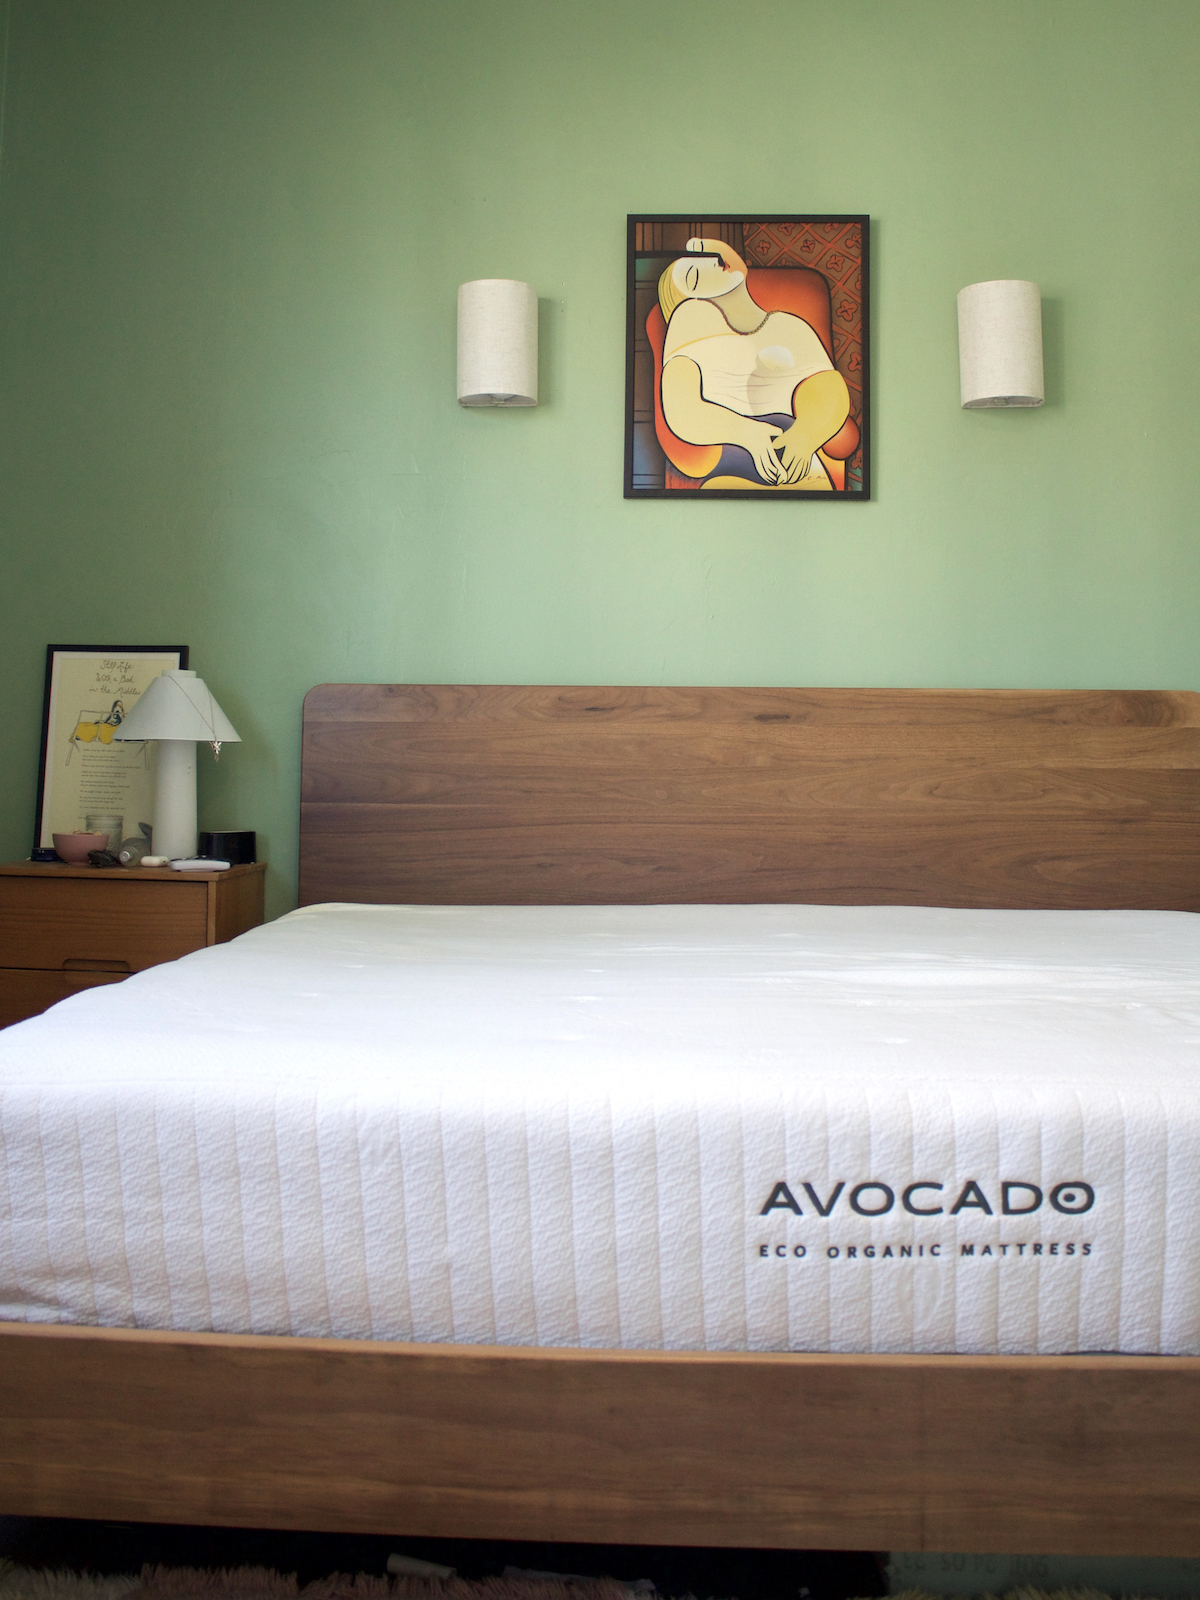 A bedroom with a wooden bed frame and an Avocado Eco Organic Mattress. The walls are painted green and there is a framed art piece above the bed, flanked by two wall-mounted lights.